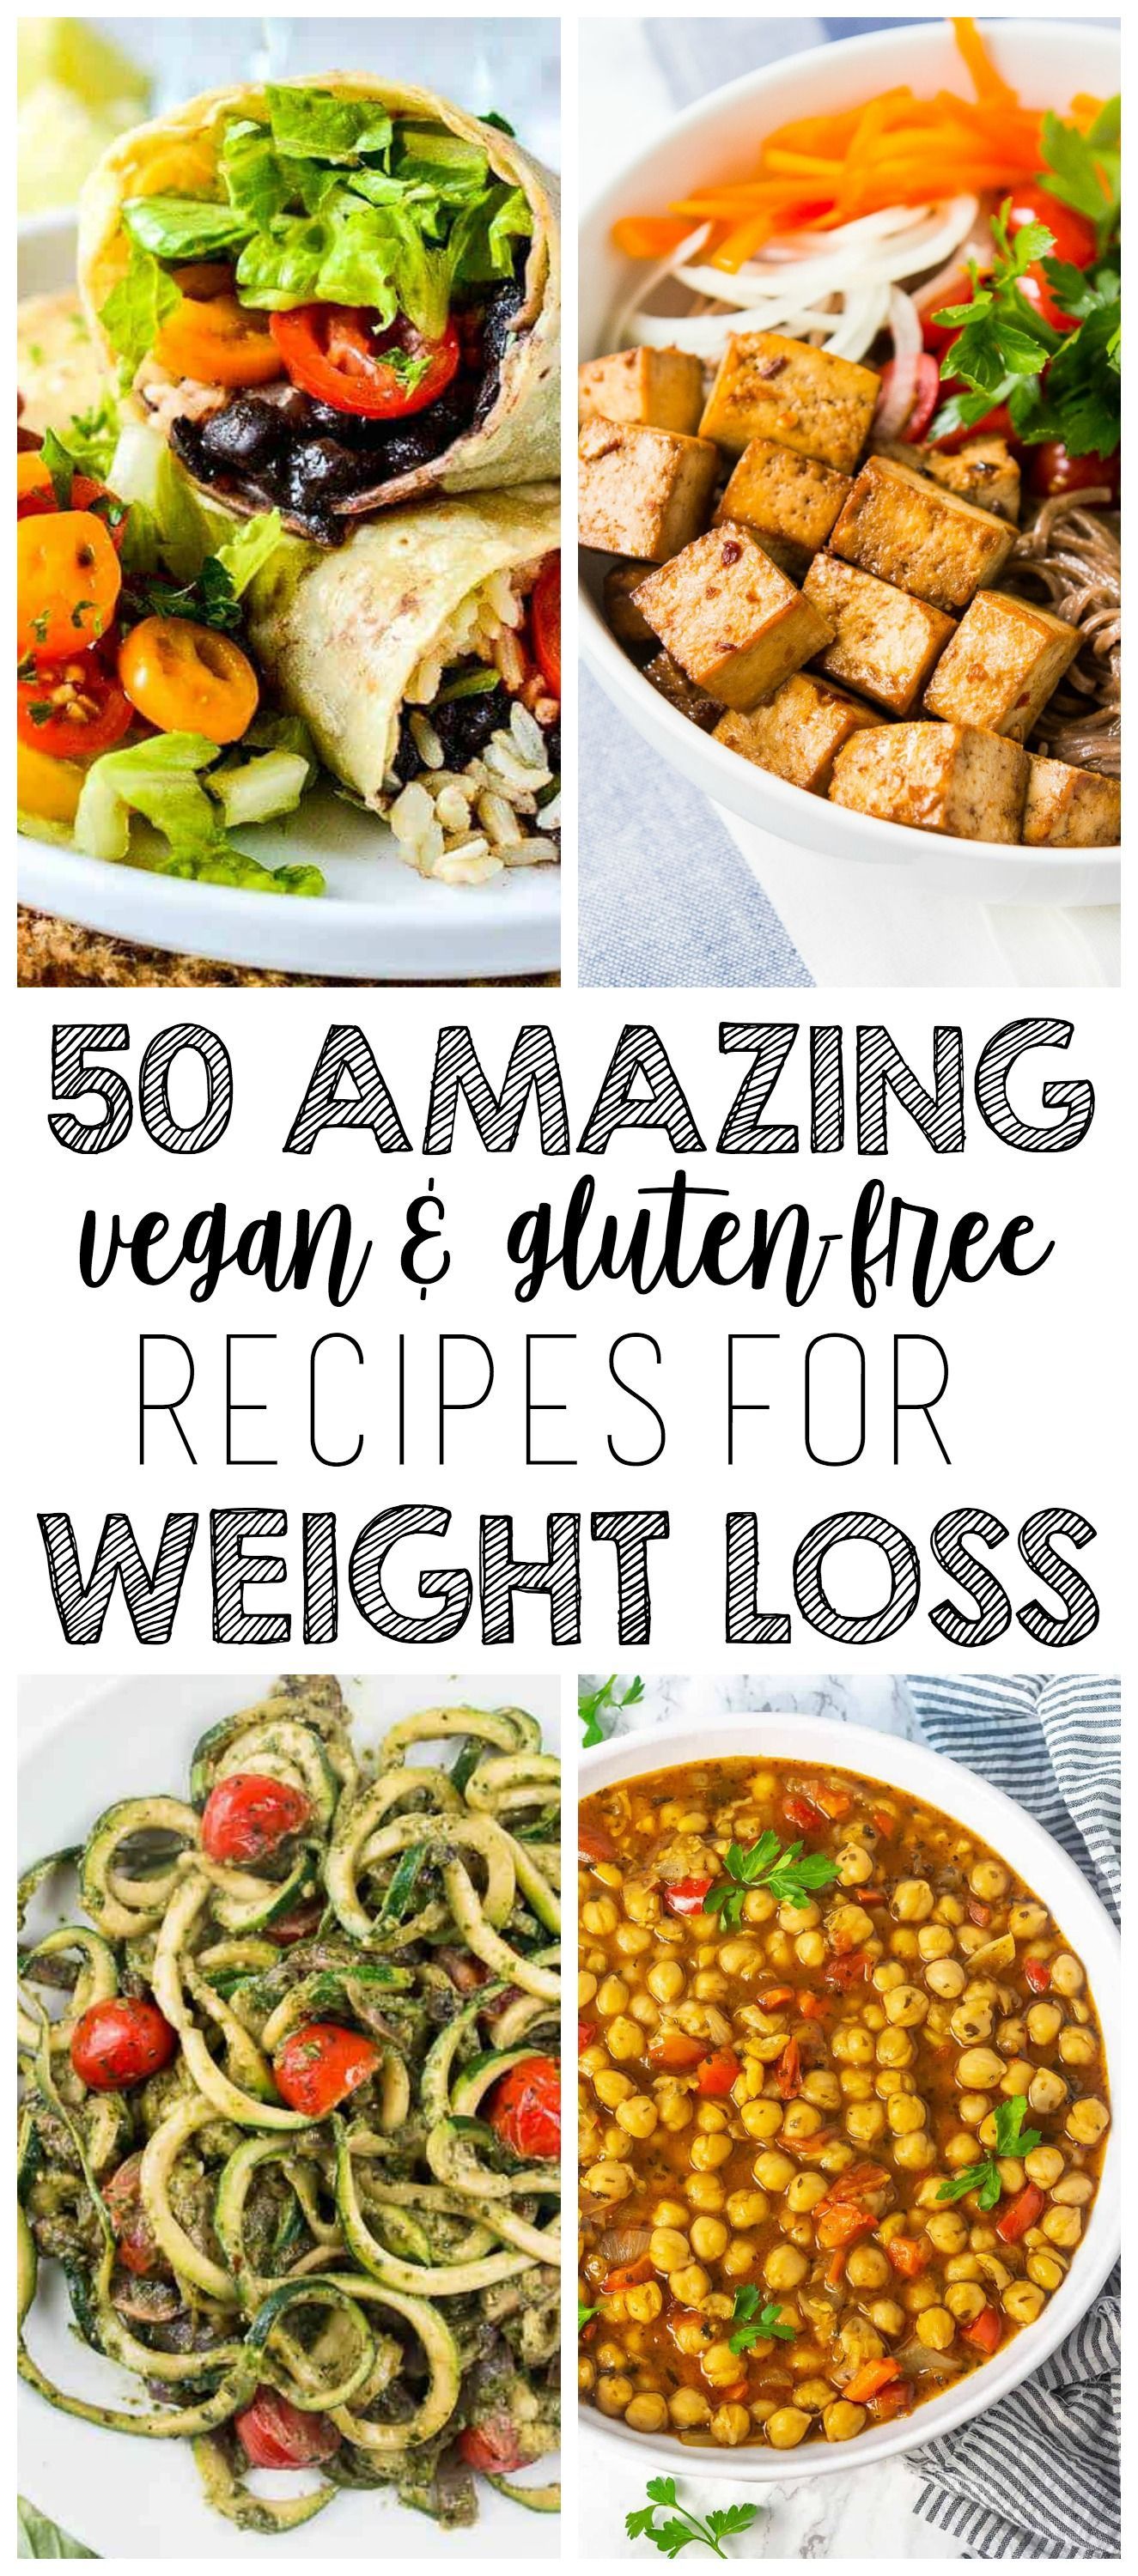 50 AMAZING Vegan Meals for Weight Loss (Gluten-Free & Low-Calorie) -   14 healthy recipes weight loss cooking ideas